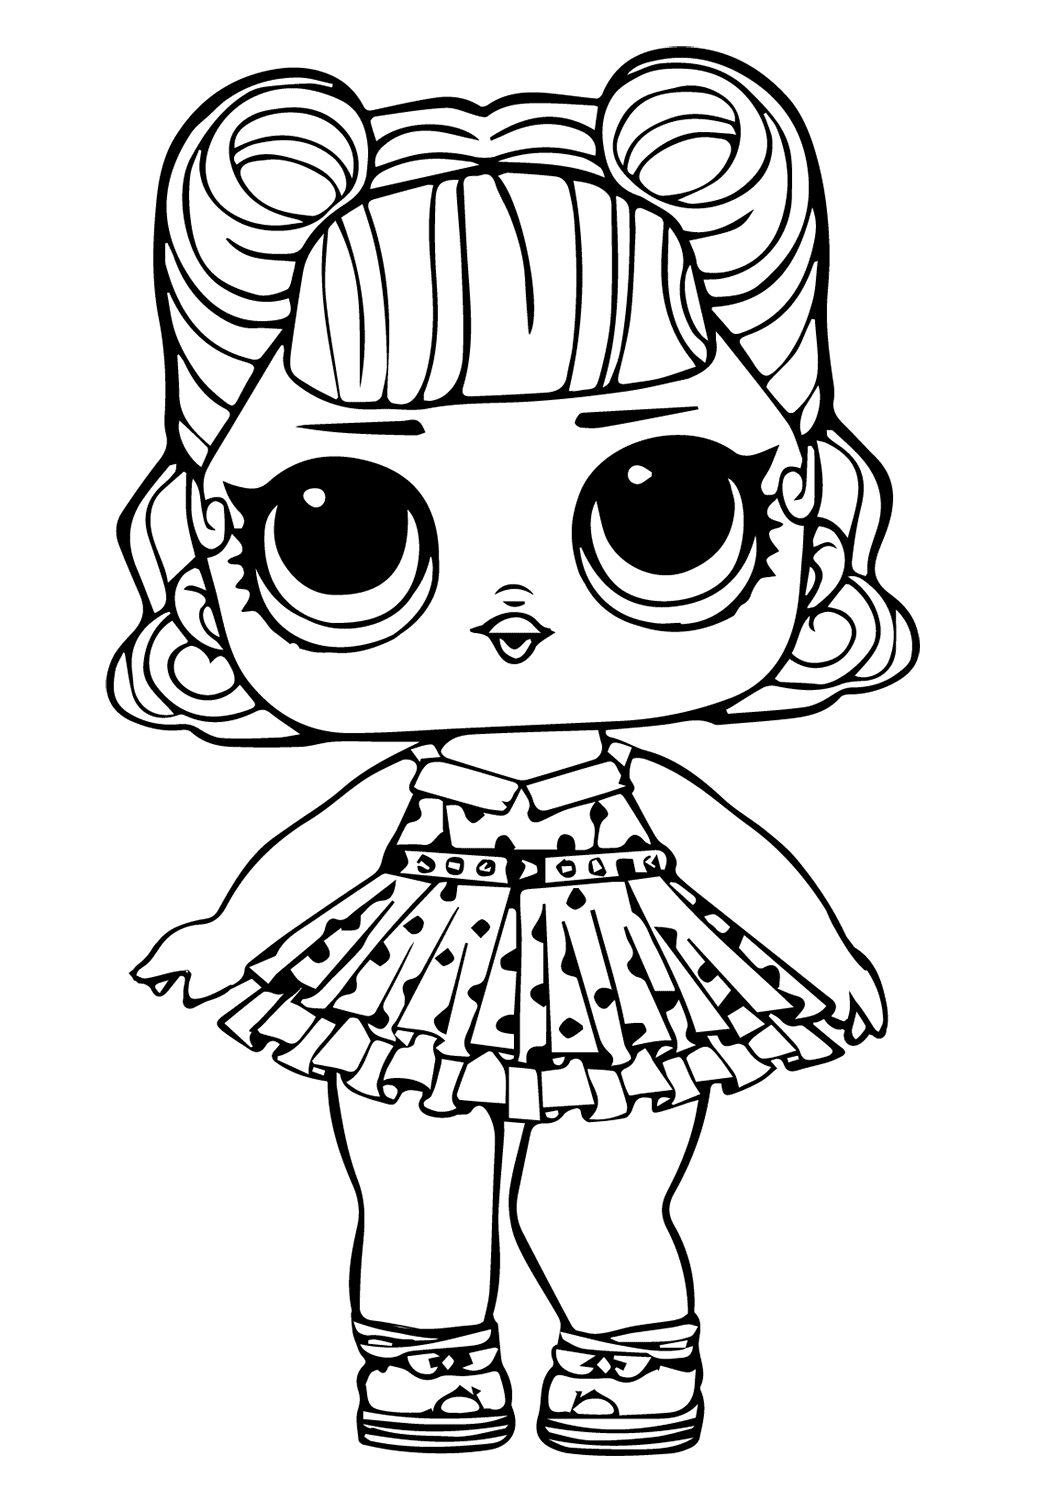 LOL Surprise Doll Coloring Page Jitterbug